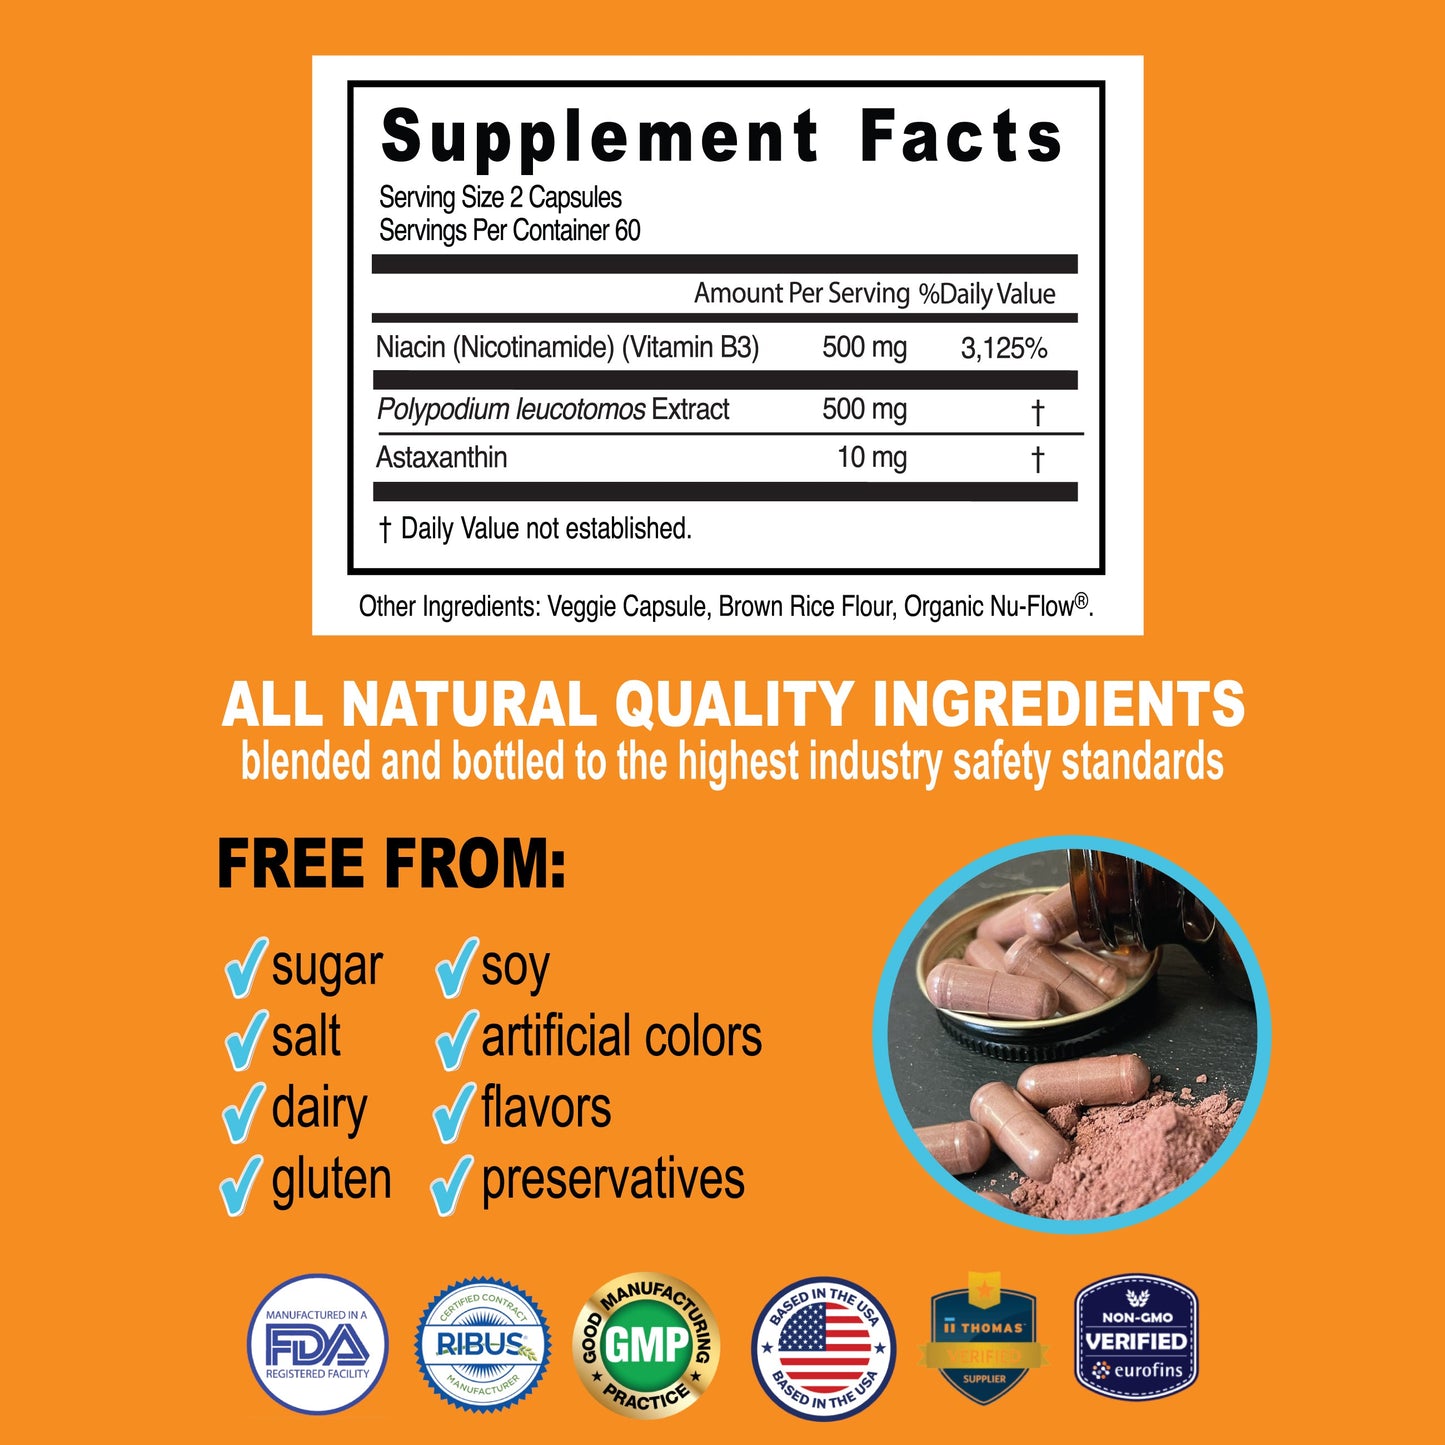 SunTru Ultra 3 daily skin Supplement Facts panel. Headline Text - ALL NATURAL QUALITY INGREDIENTS blended and bottled to the highest industry safety standards. Nicotinamide (B3) 500 mg Polypodium leucotomos Extract 500 mg Astaxanthin 10 mg FREE FROM  sugar, salt, dairy, gluten, soy, artificial colors, flavors and preservatives